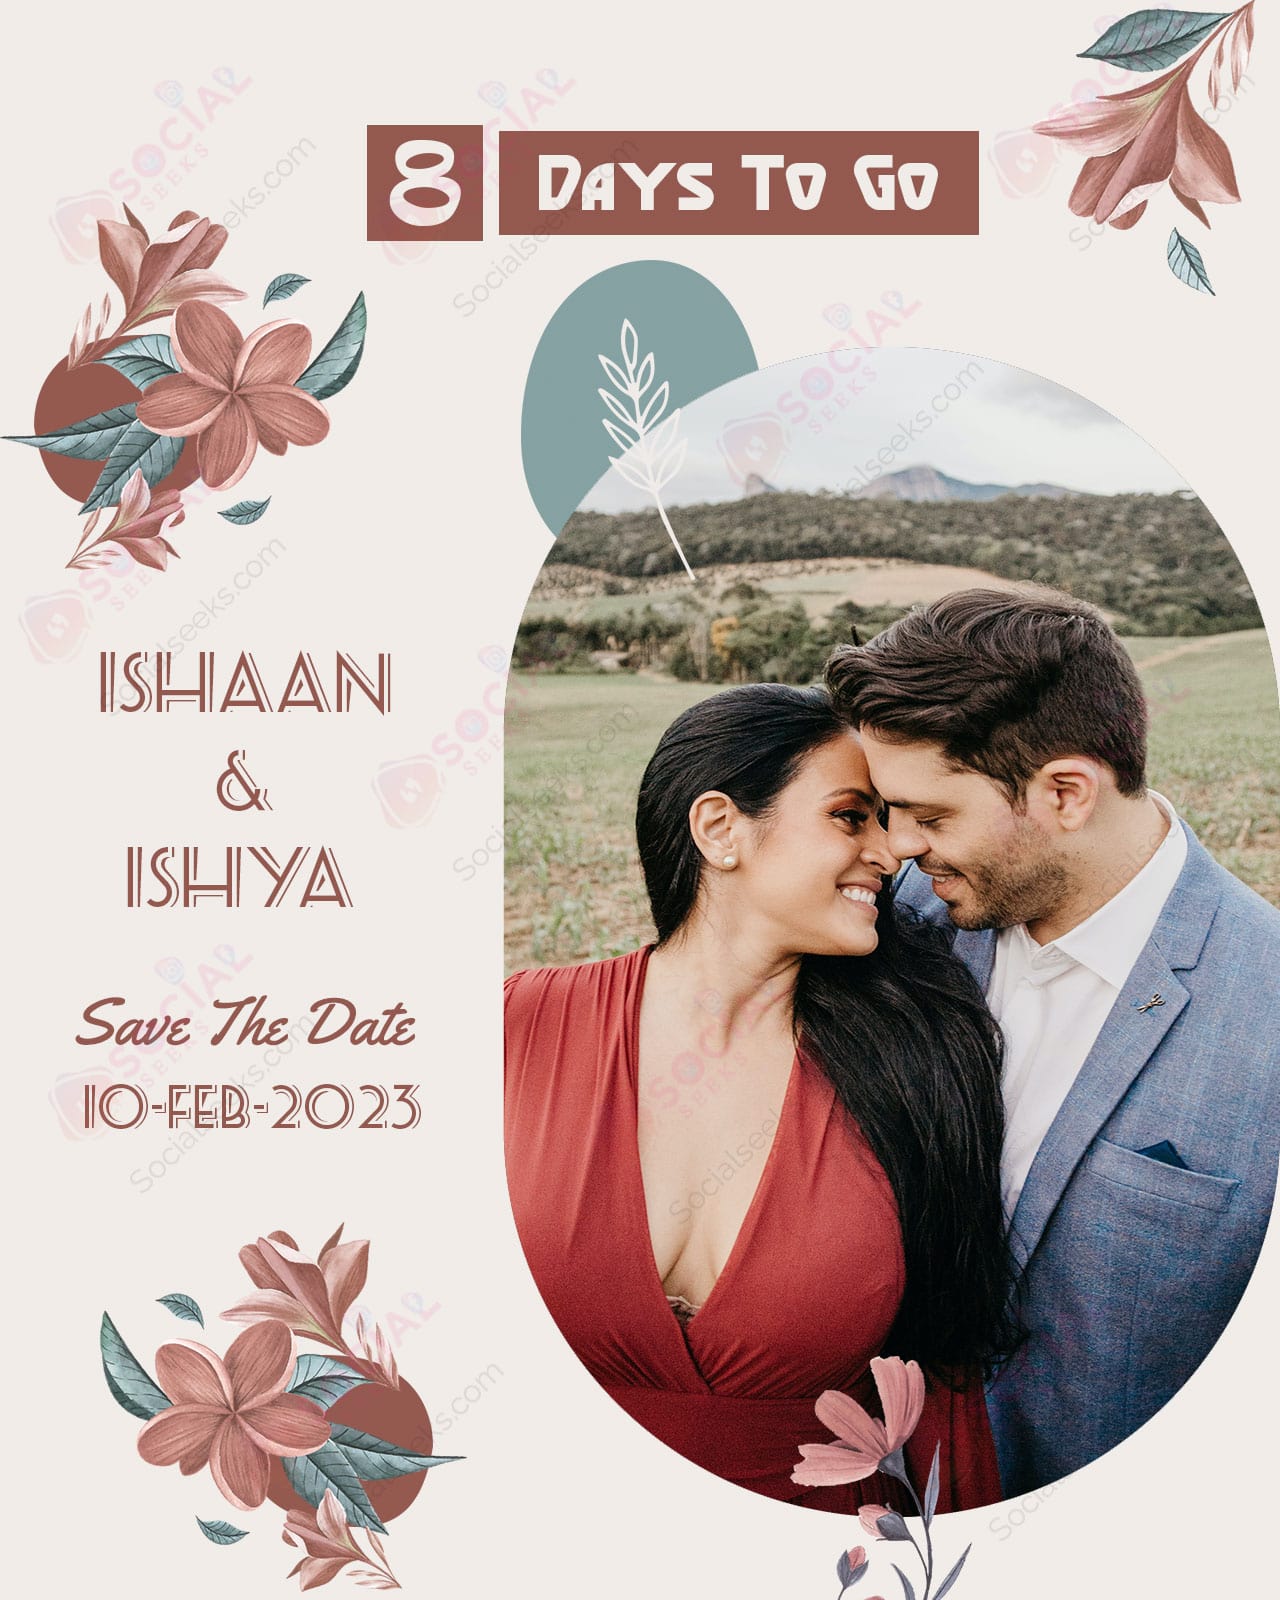 8 Days to go marriage countdown customised cards